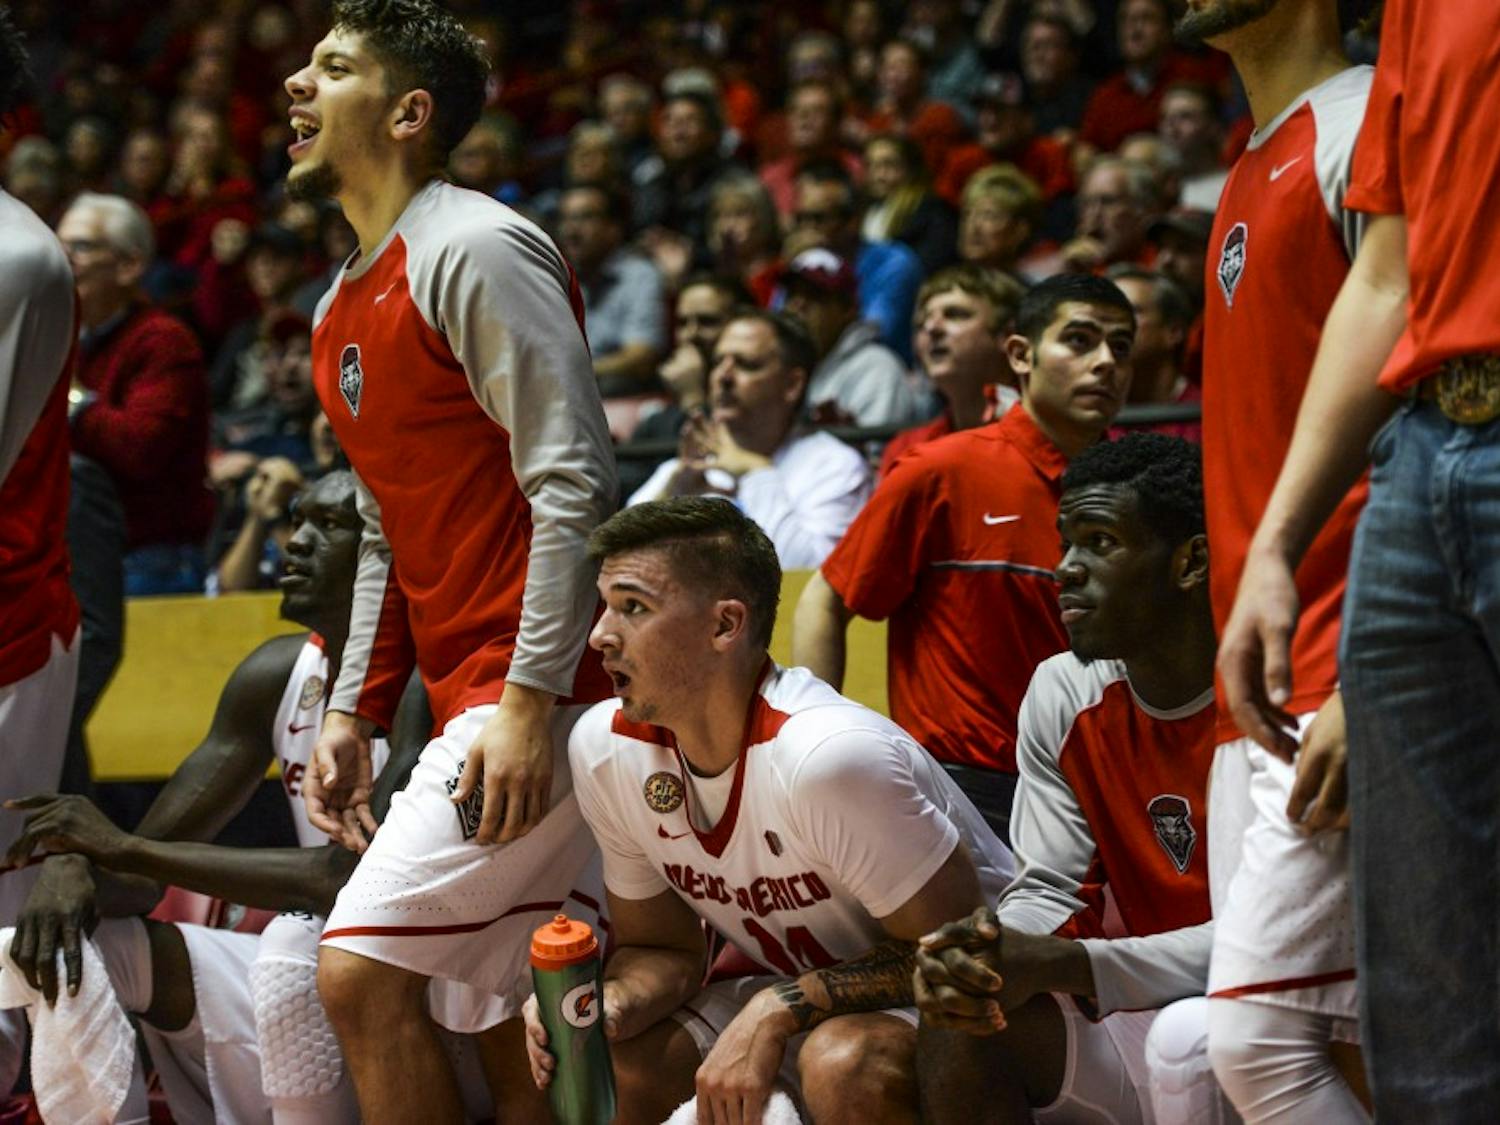 The Lobo bench anticipates a play during their game against Fresno State Wednesday, Dec. 28, 2016 at WisePies Arena. The Lobos will face off with Nevada State at WisePies Arena this Saturday at 9:15 p.m..